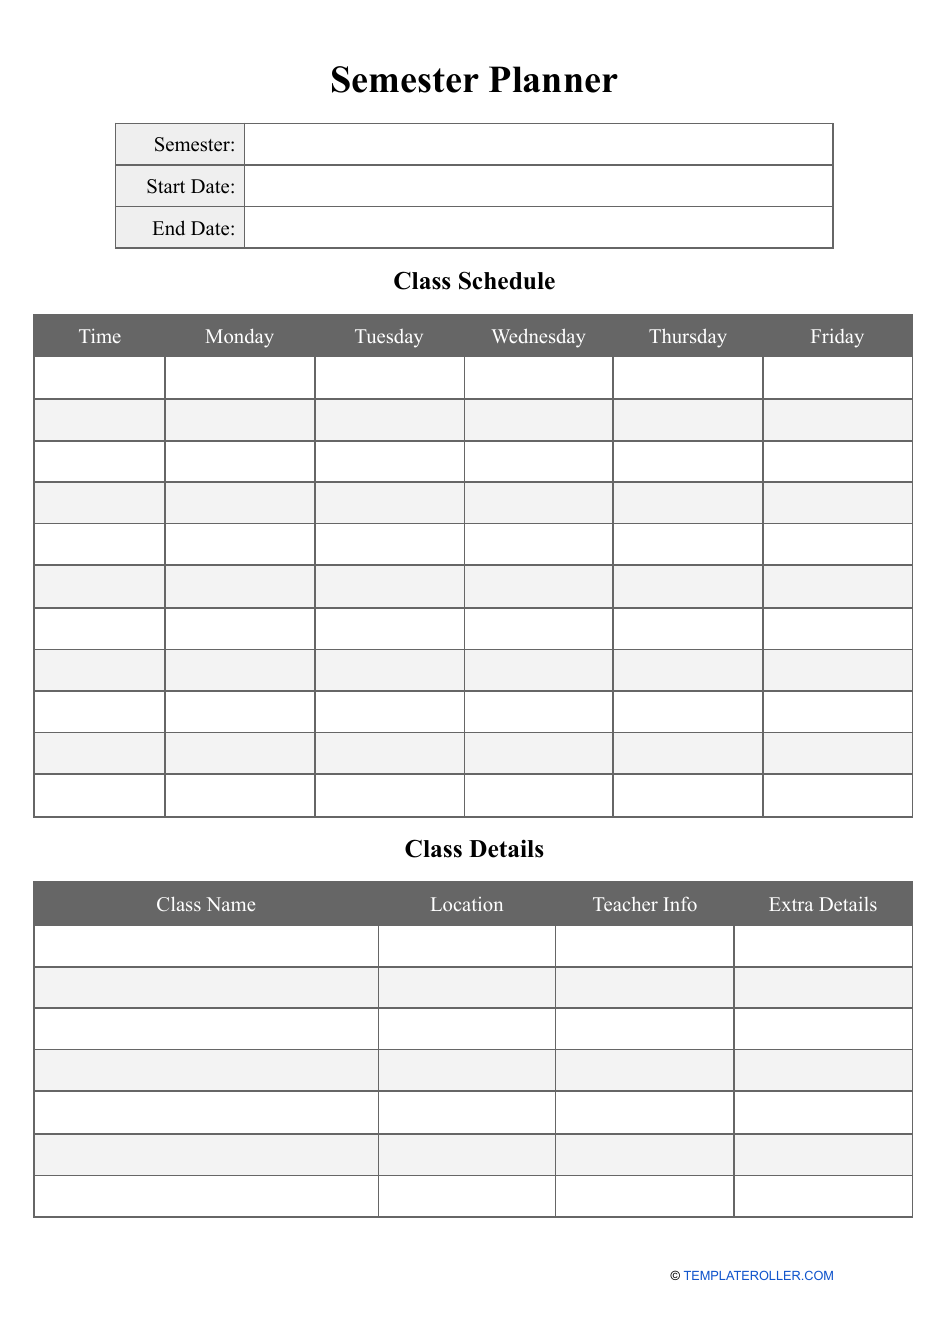 Semester Planner Template - Professional and Editable Design